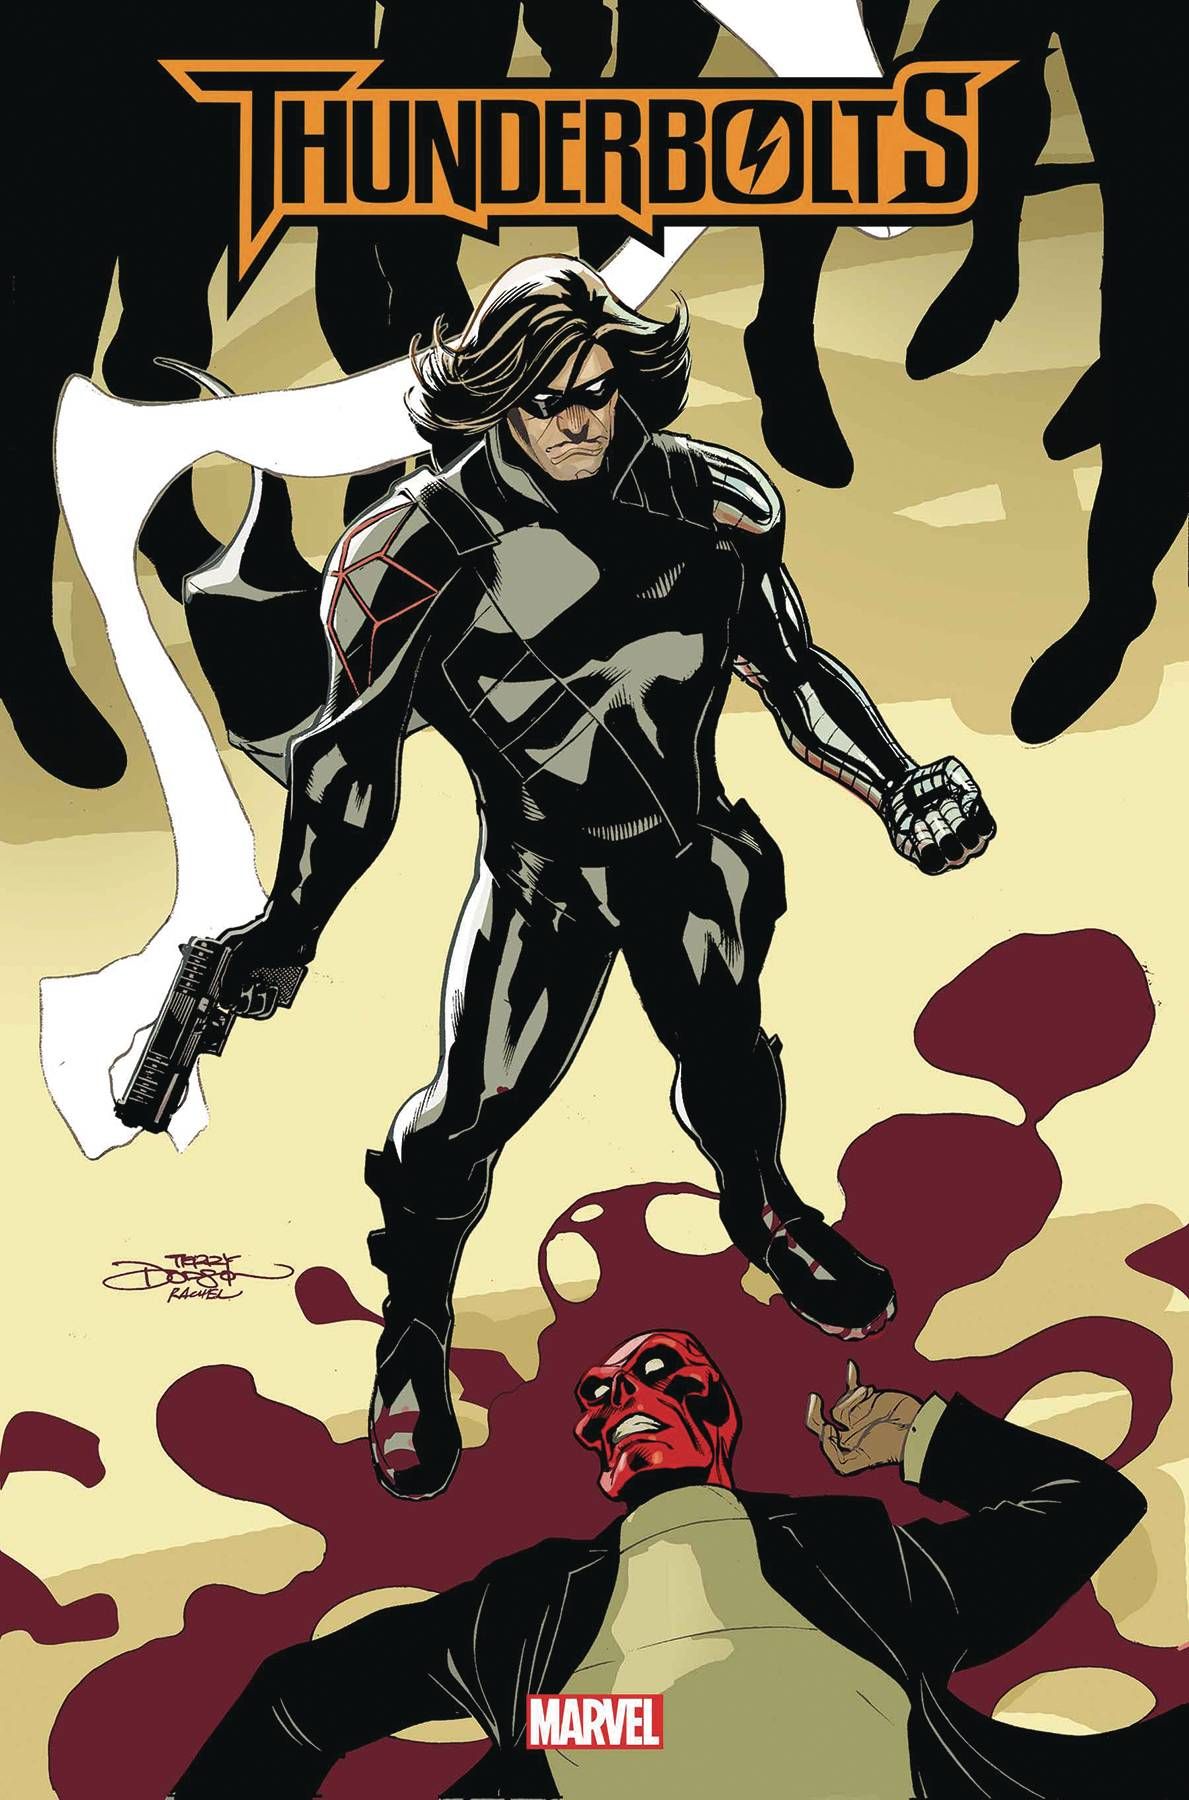 Winter Soldier Joins Forces with Thunderbolts to Take Down Marvel's Most Dangerous Villains